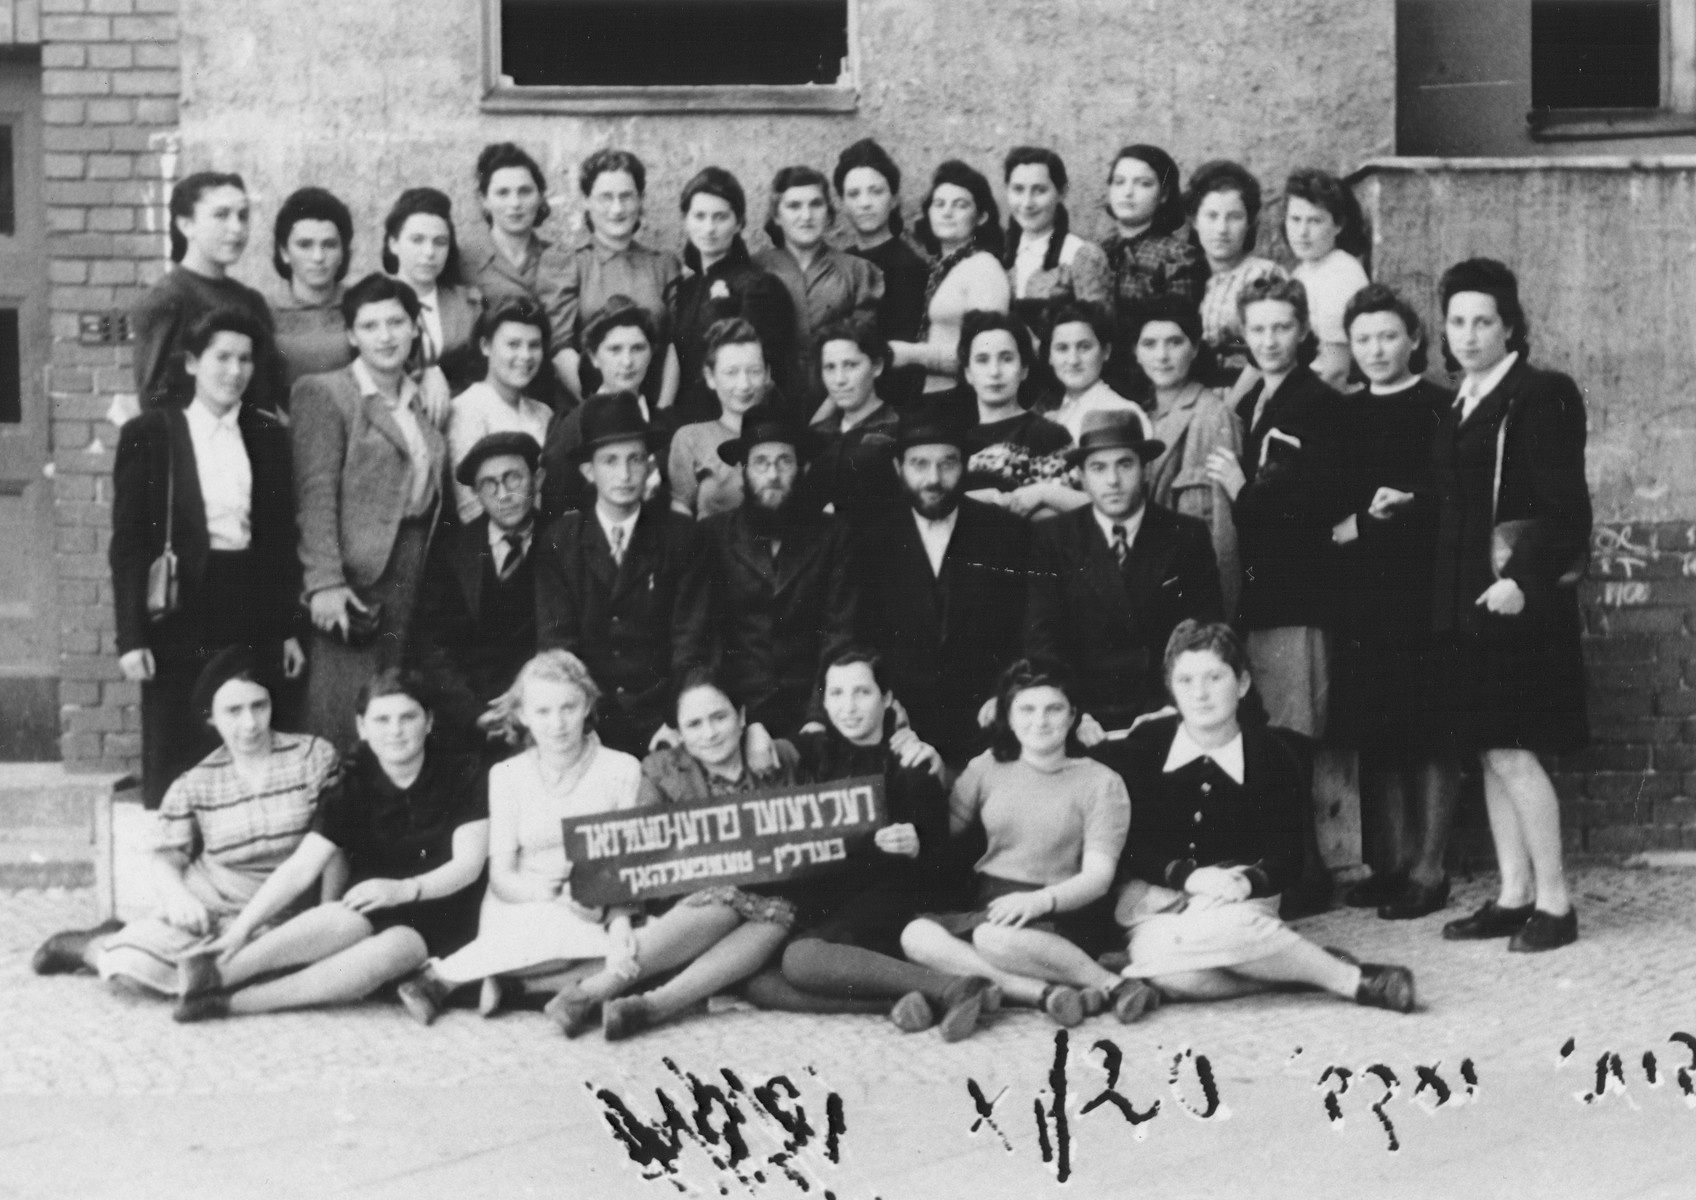 Group portrait of the students and faculty of the Beit Yaakov school in the Tempelhof displaced persons camp.